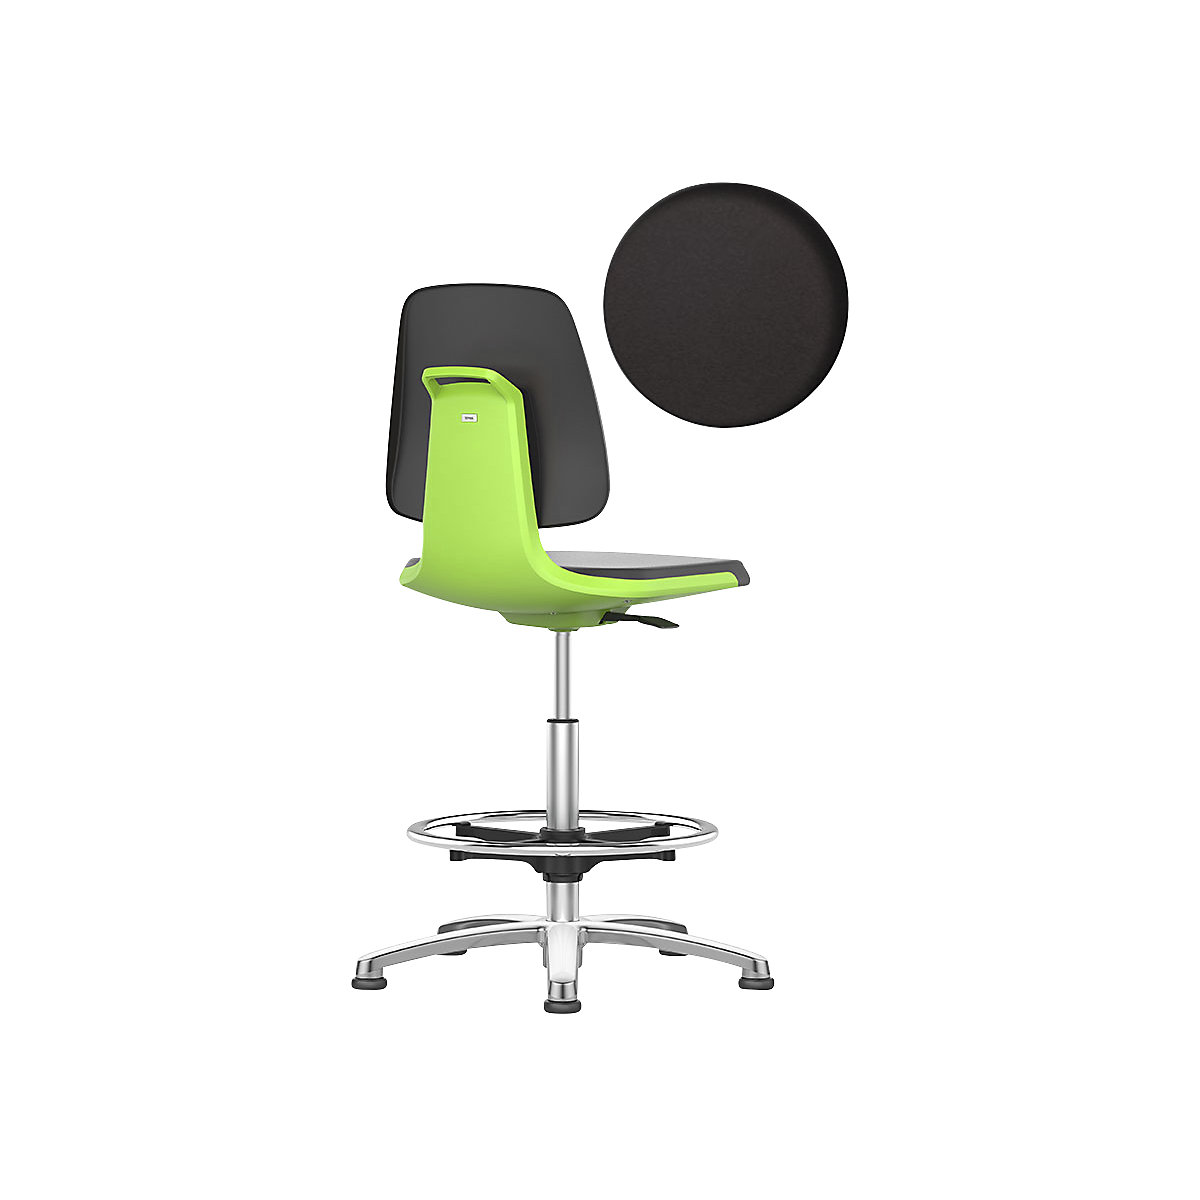 LABSIT industrial swivel chair – bimos, with floor glides and foot ring, vinyl upholstered seat, green-14